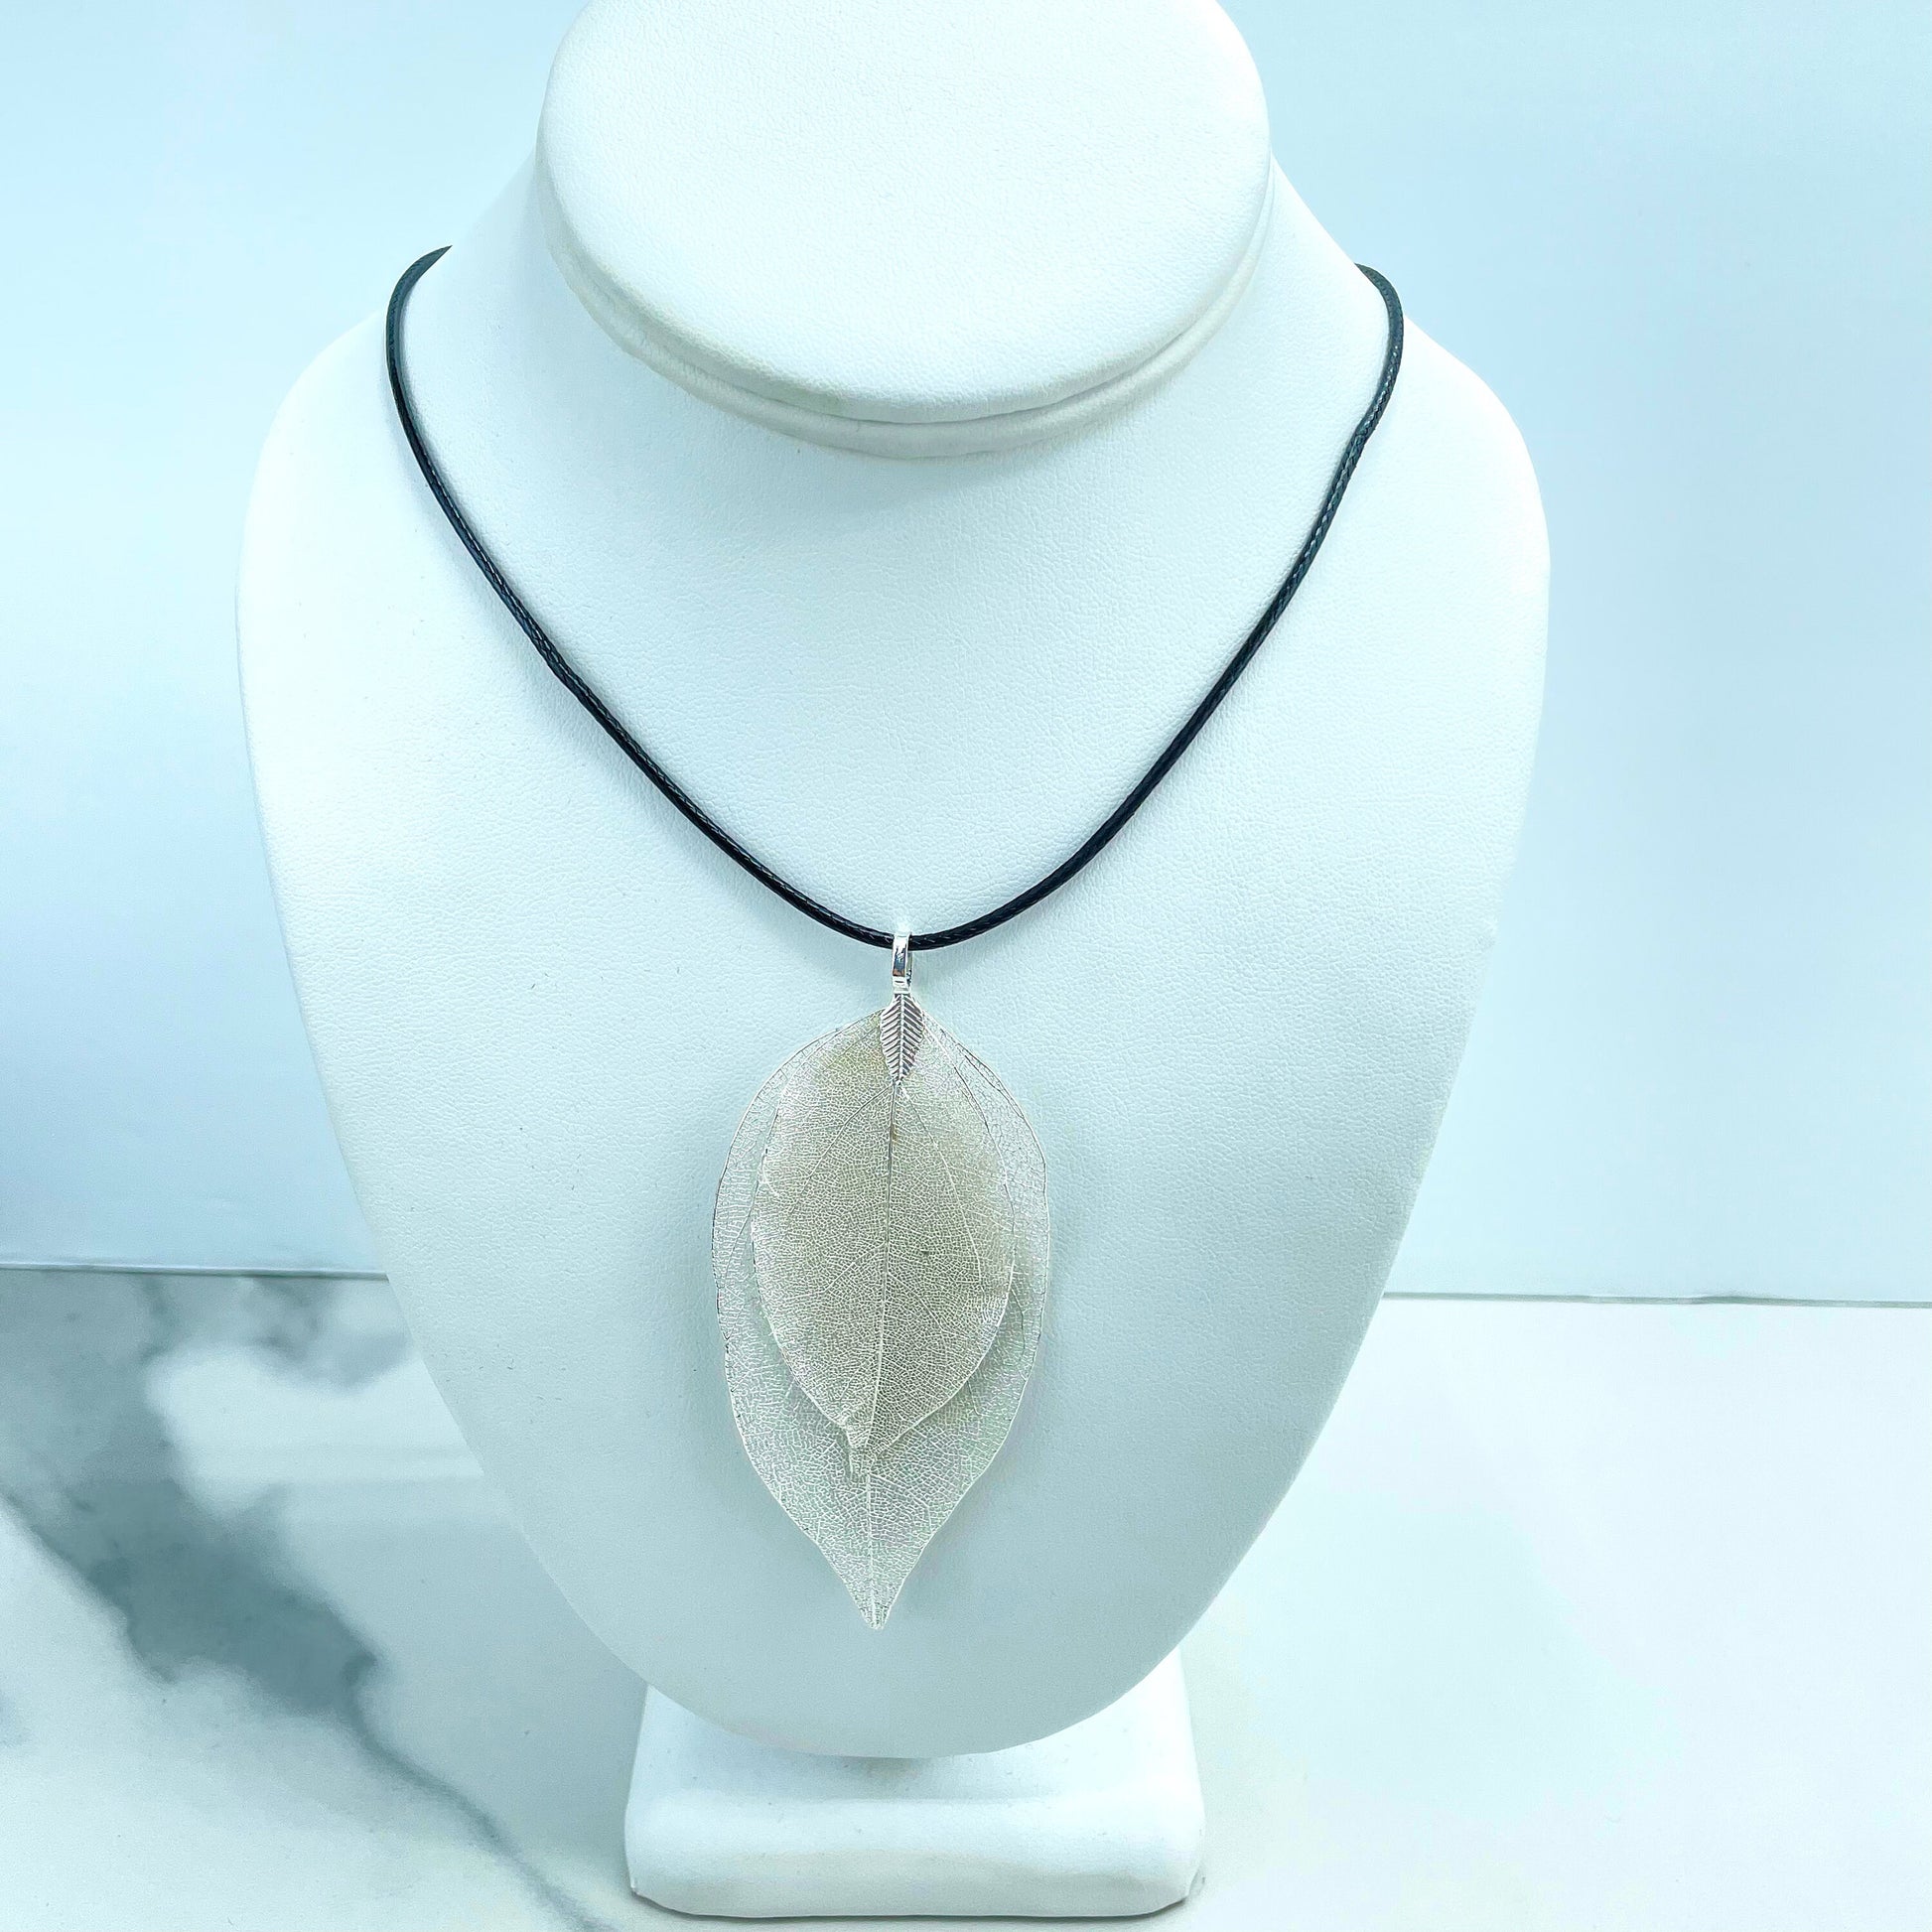 18k Rose Gold Filled or Silver Filled Double Layered Large Pendant Hand Made with Real Leaf & Black Cord Chain Necklace, Wholesale Jewelry